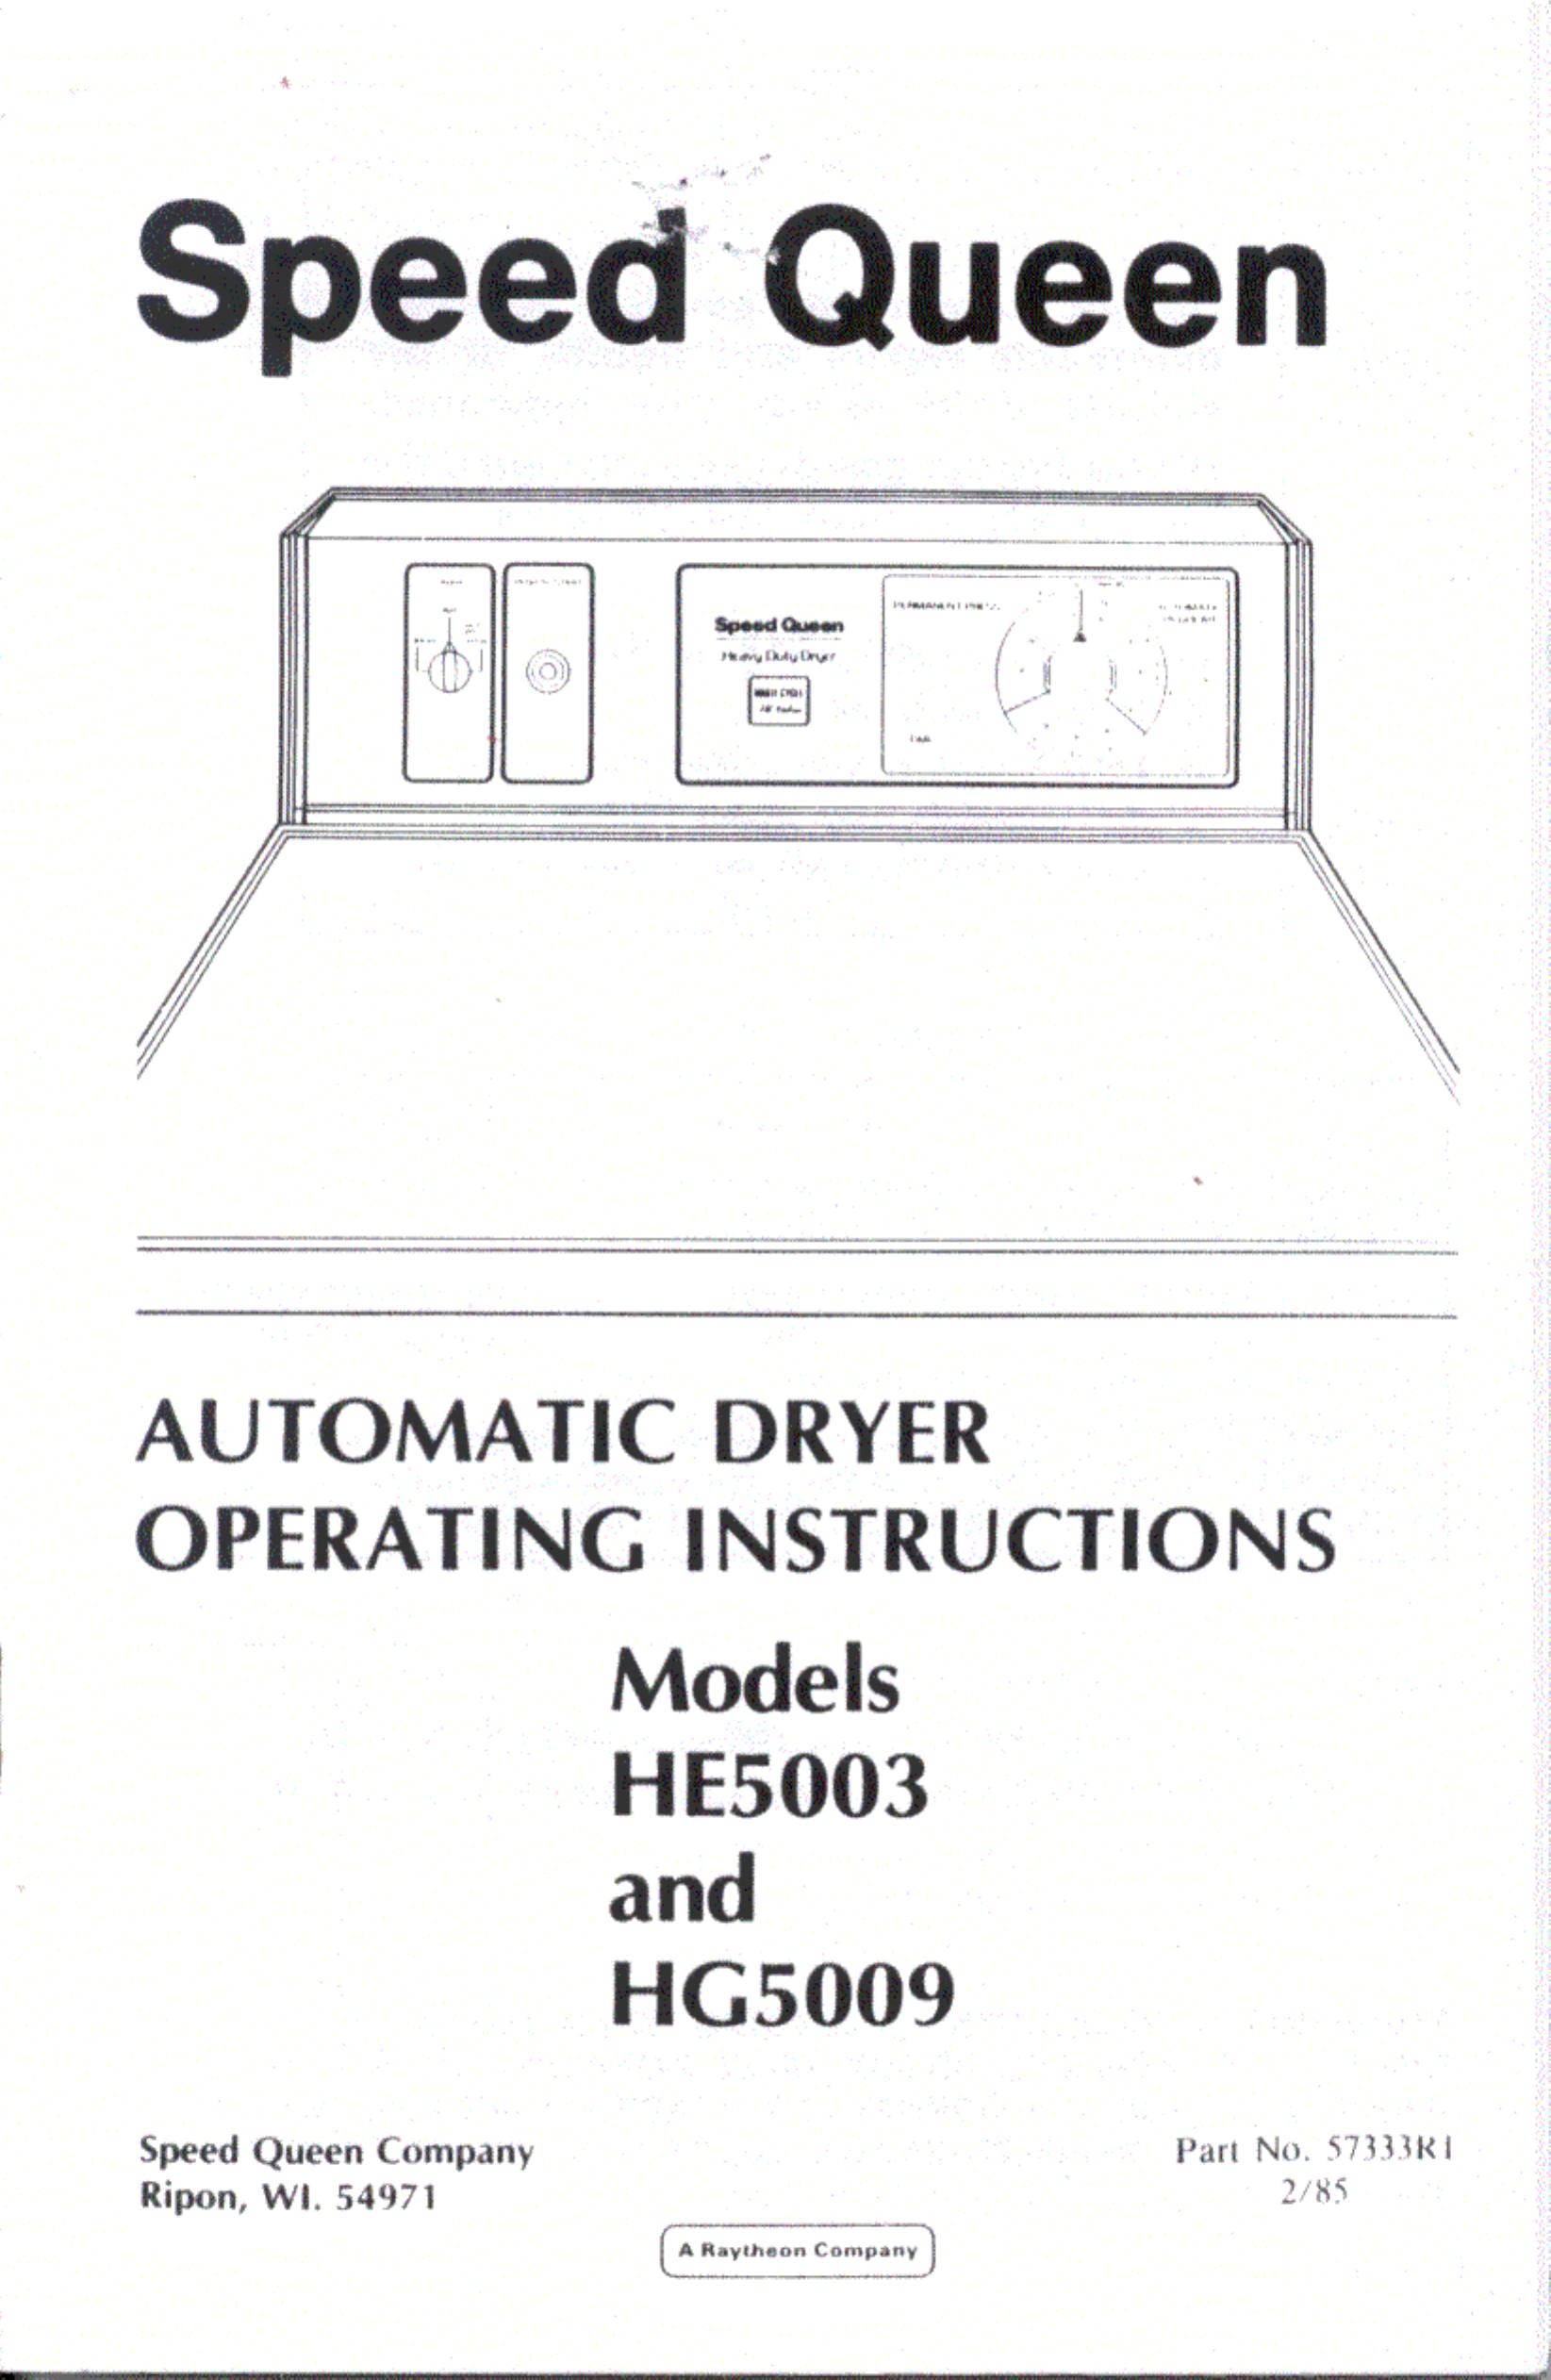 Speed Queen HG5009 Clothes Dryer User Manual